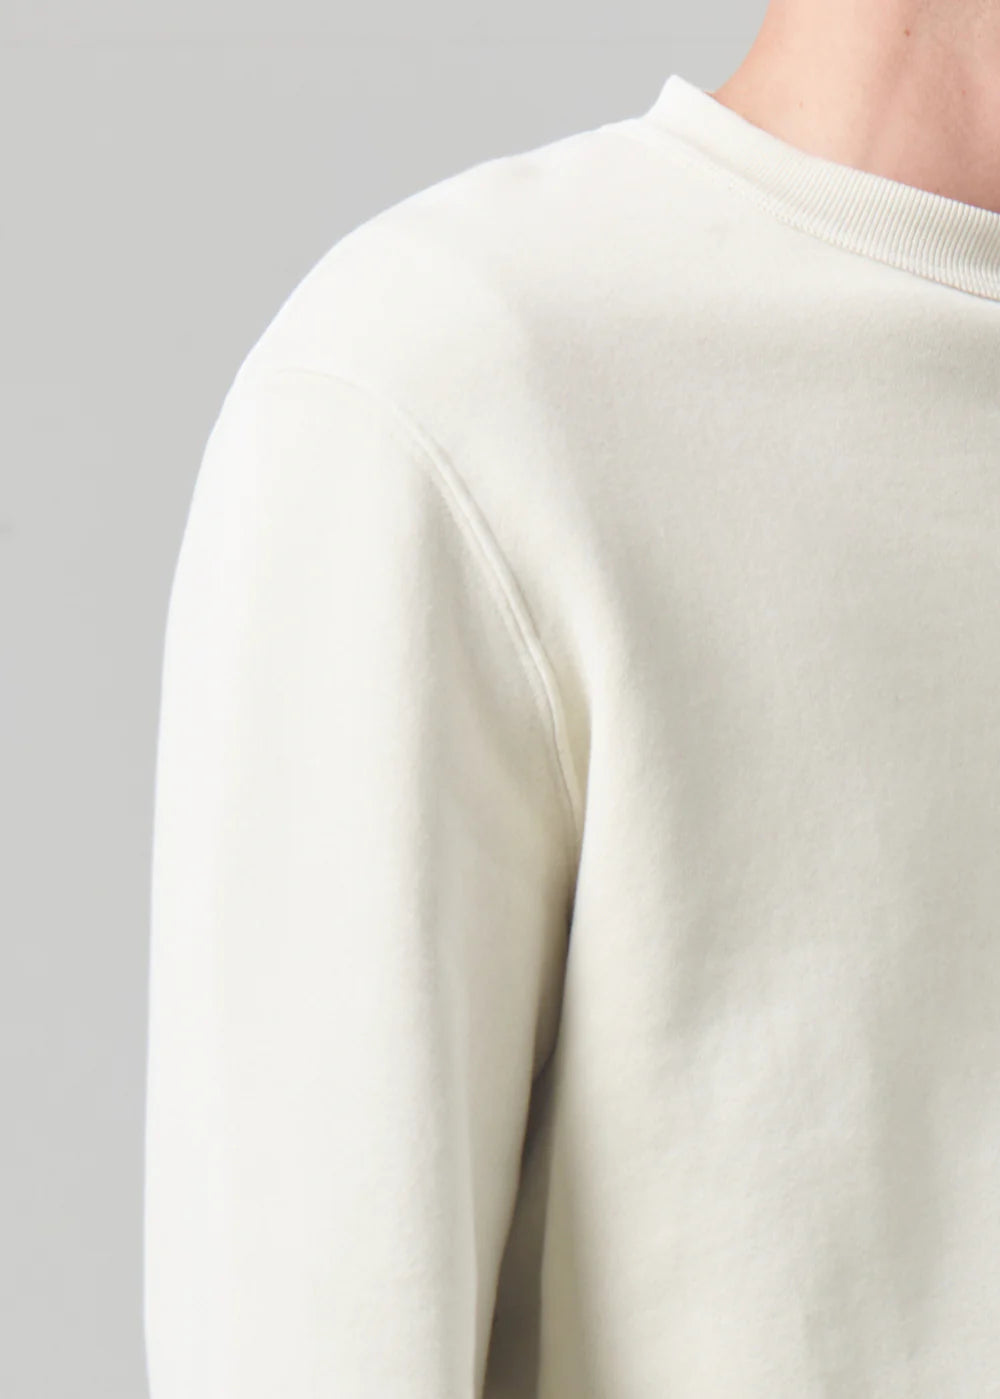 Close up, side view of a model wearing the Vintage crewneck sweater from Citizens of Humanity in off-white cream color